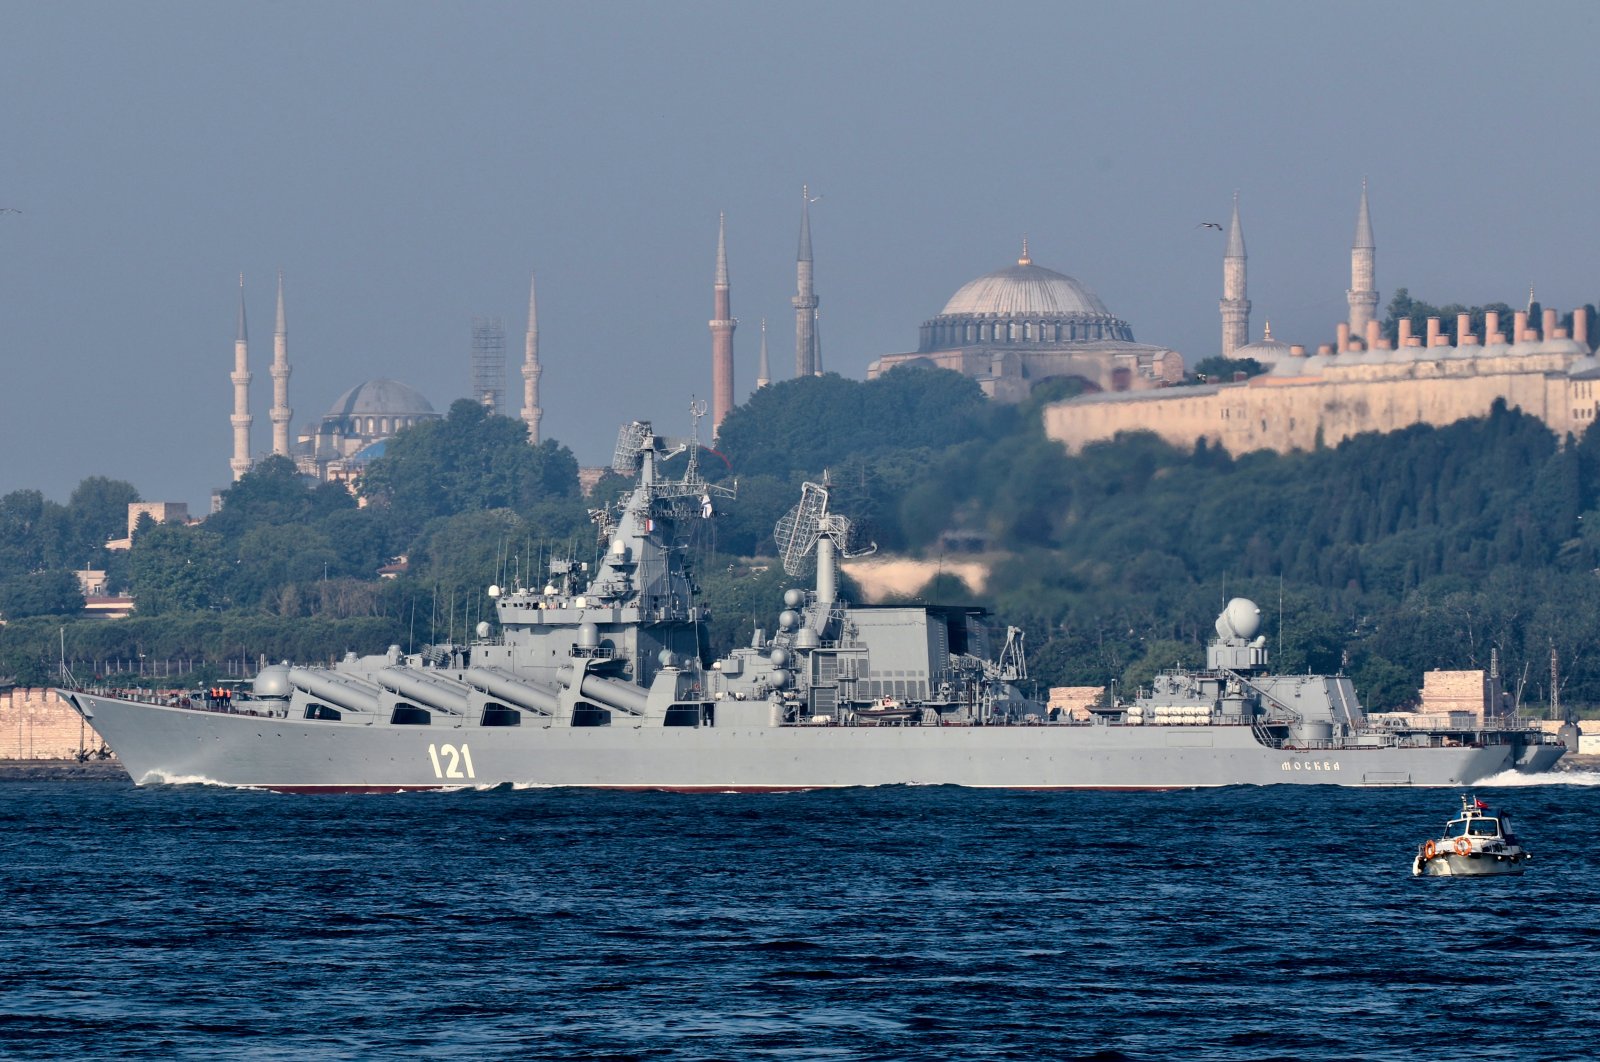 The Russian Navy's guided missile cruiser Moskva sails in the Bosphorus, on its way to the Mediterranean Sea, in Istanbul, Turkey June 18, 2021. Picture taken June 18, 2021. REUTERS/Yoruk Isik